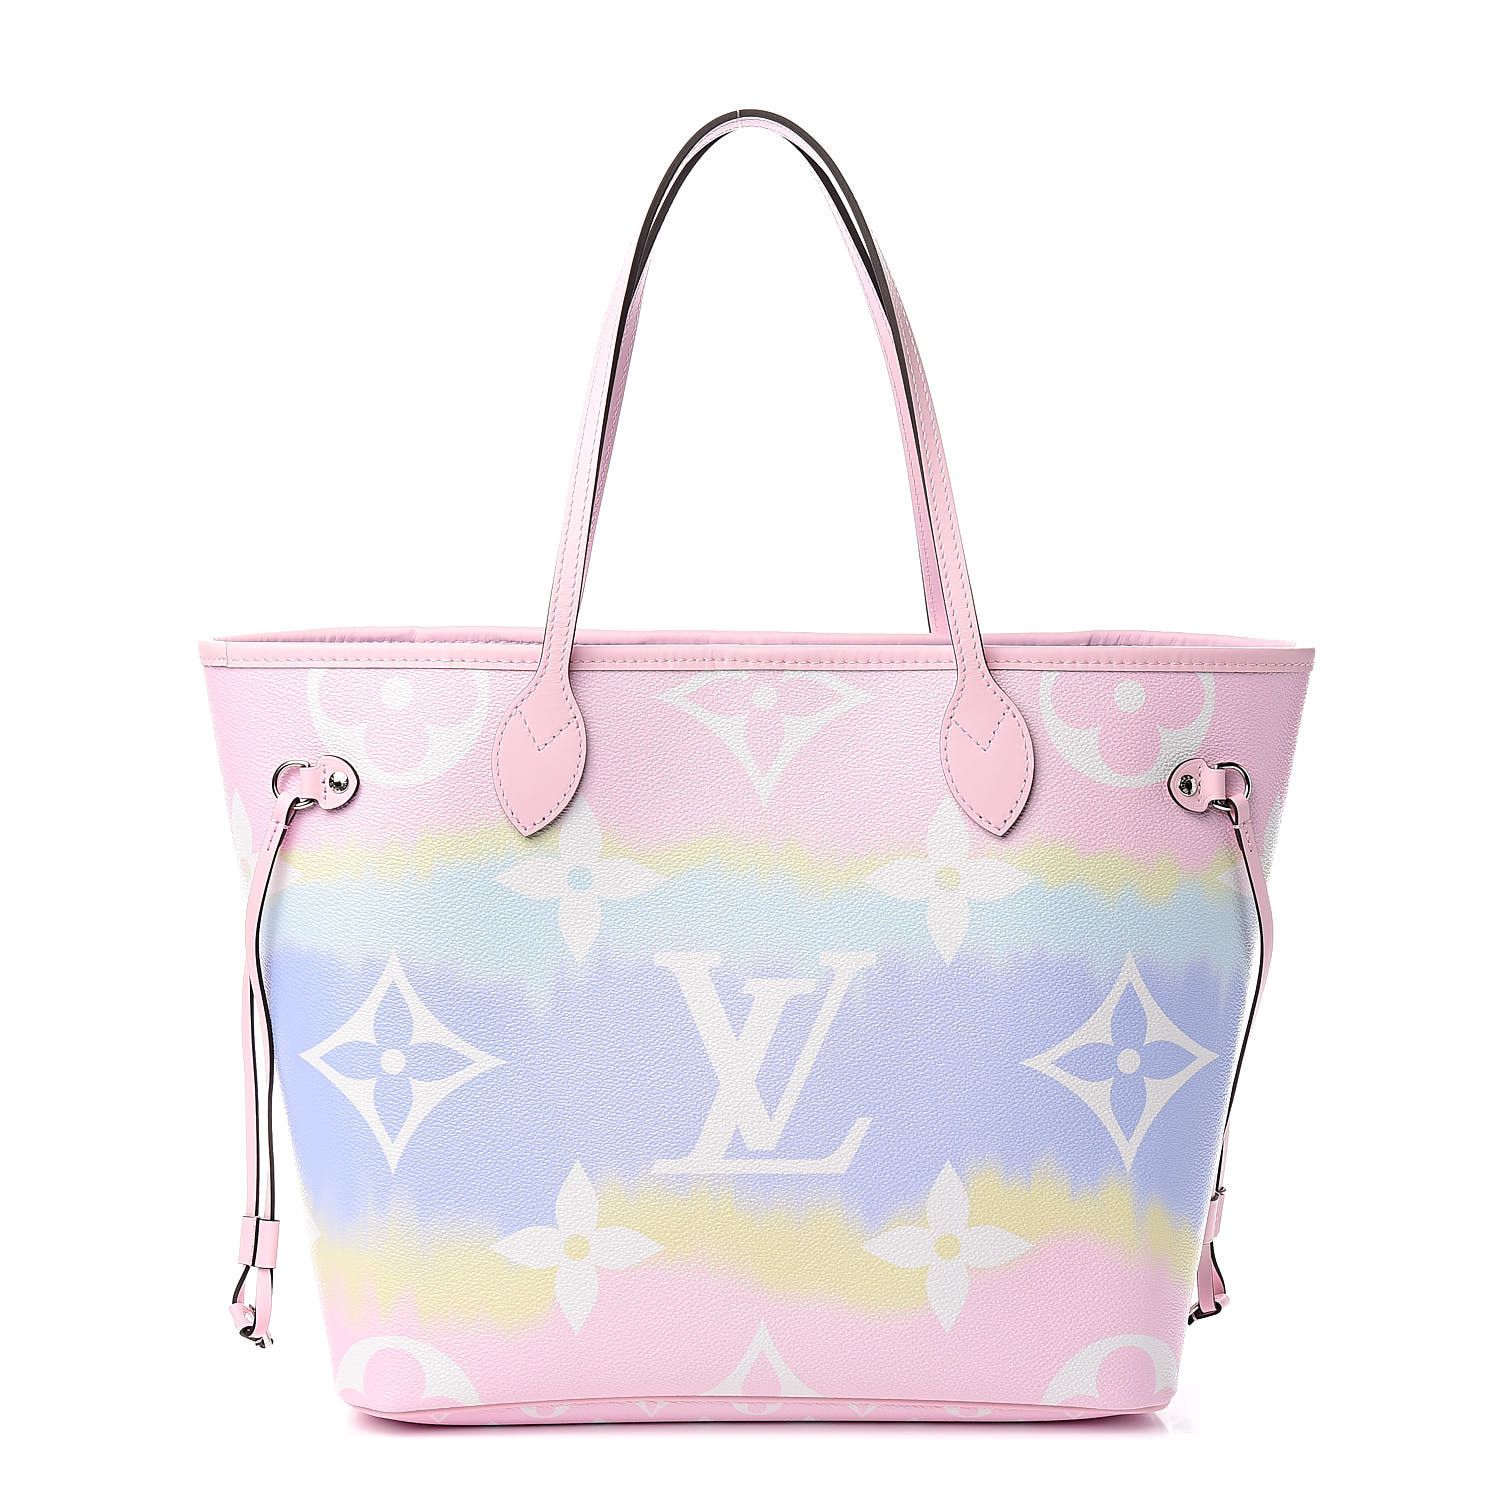 LOUIS VUITTON LV Escal Neverfull MM M45128 Tote Bag from Japan